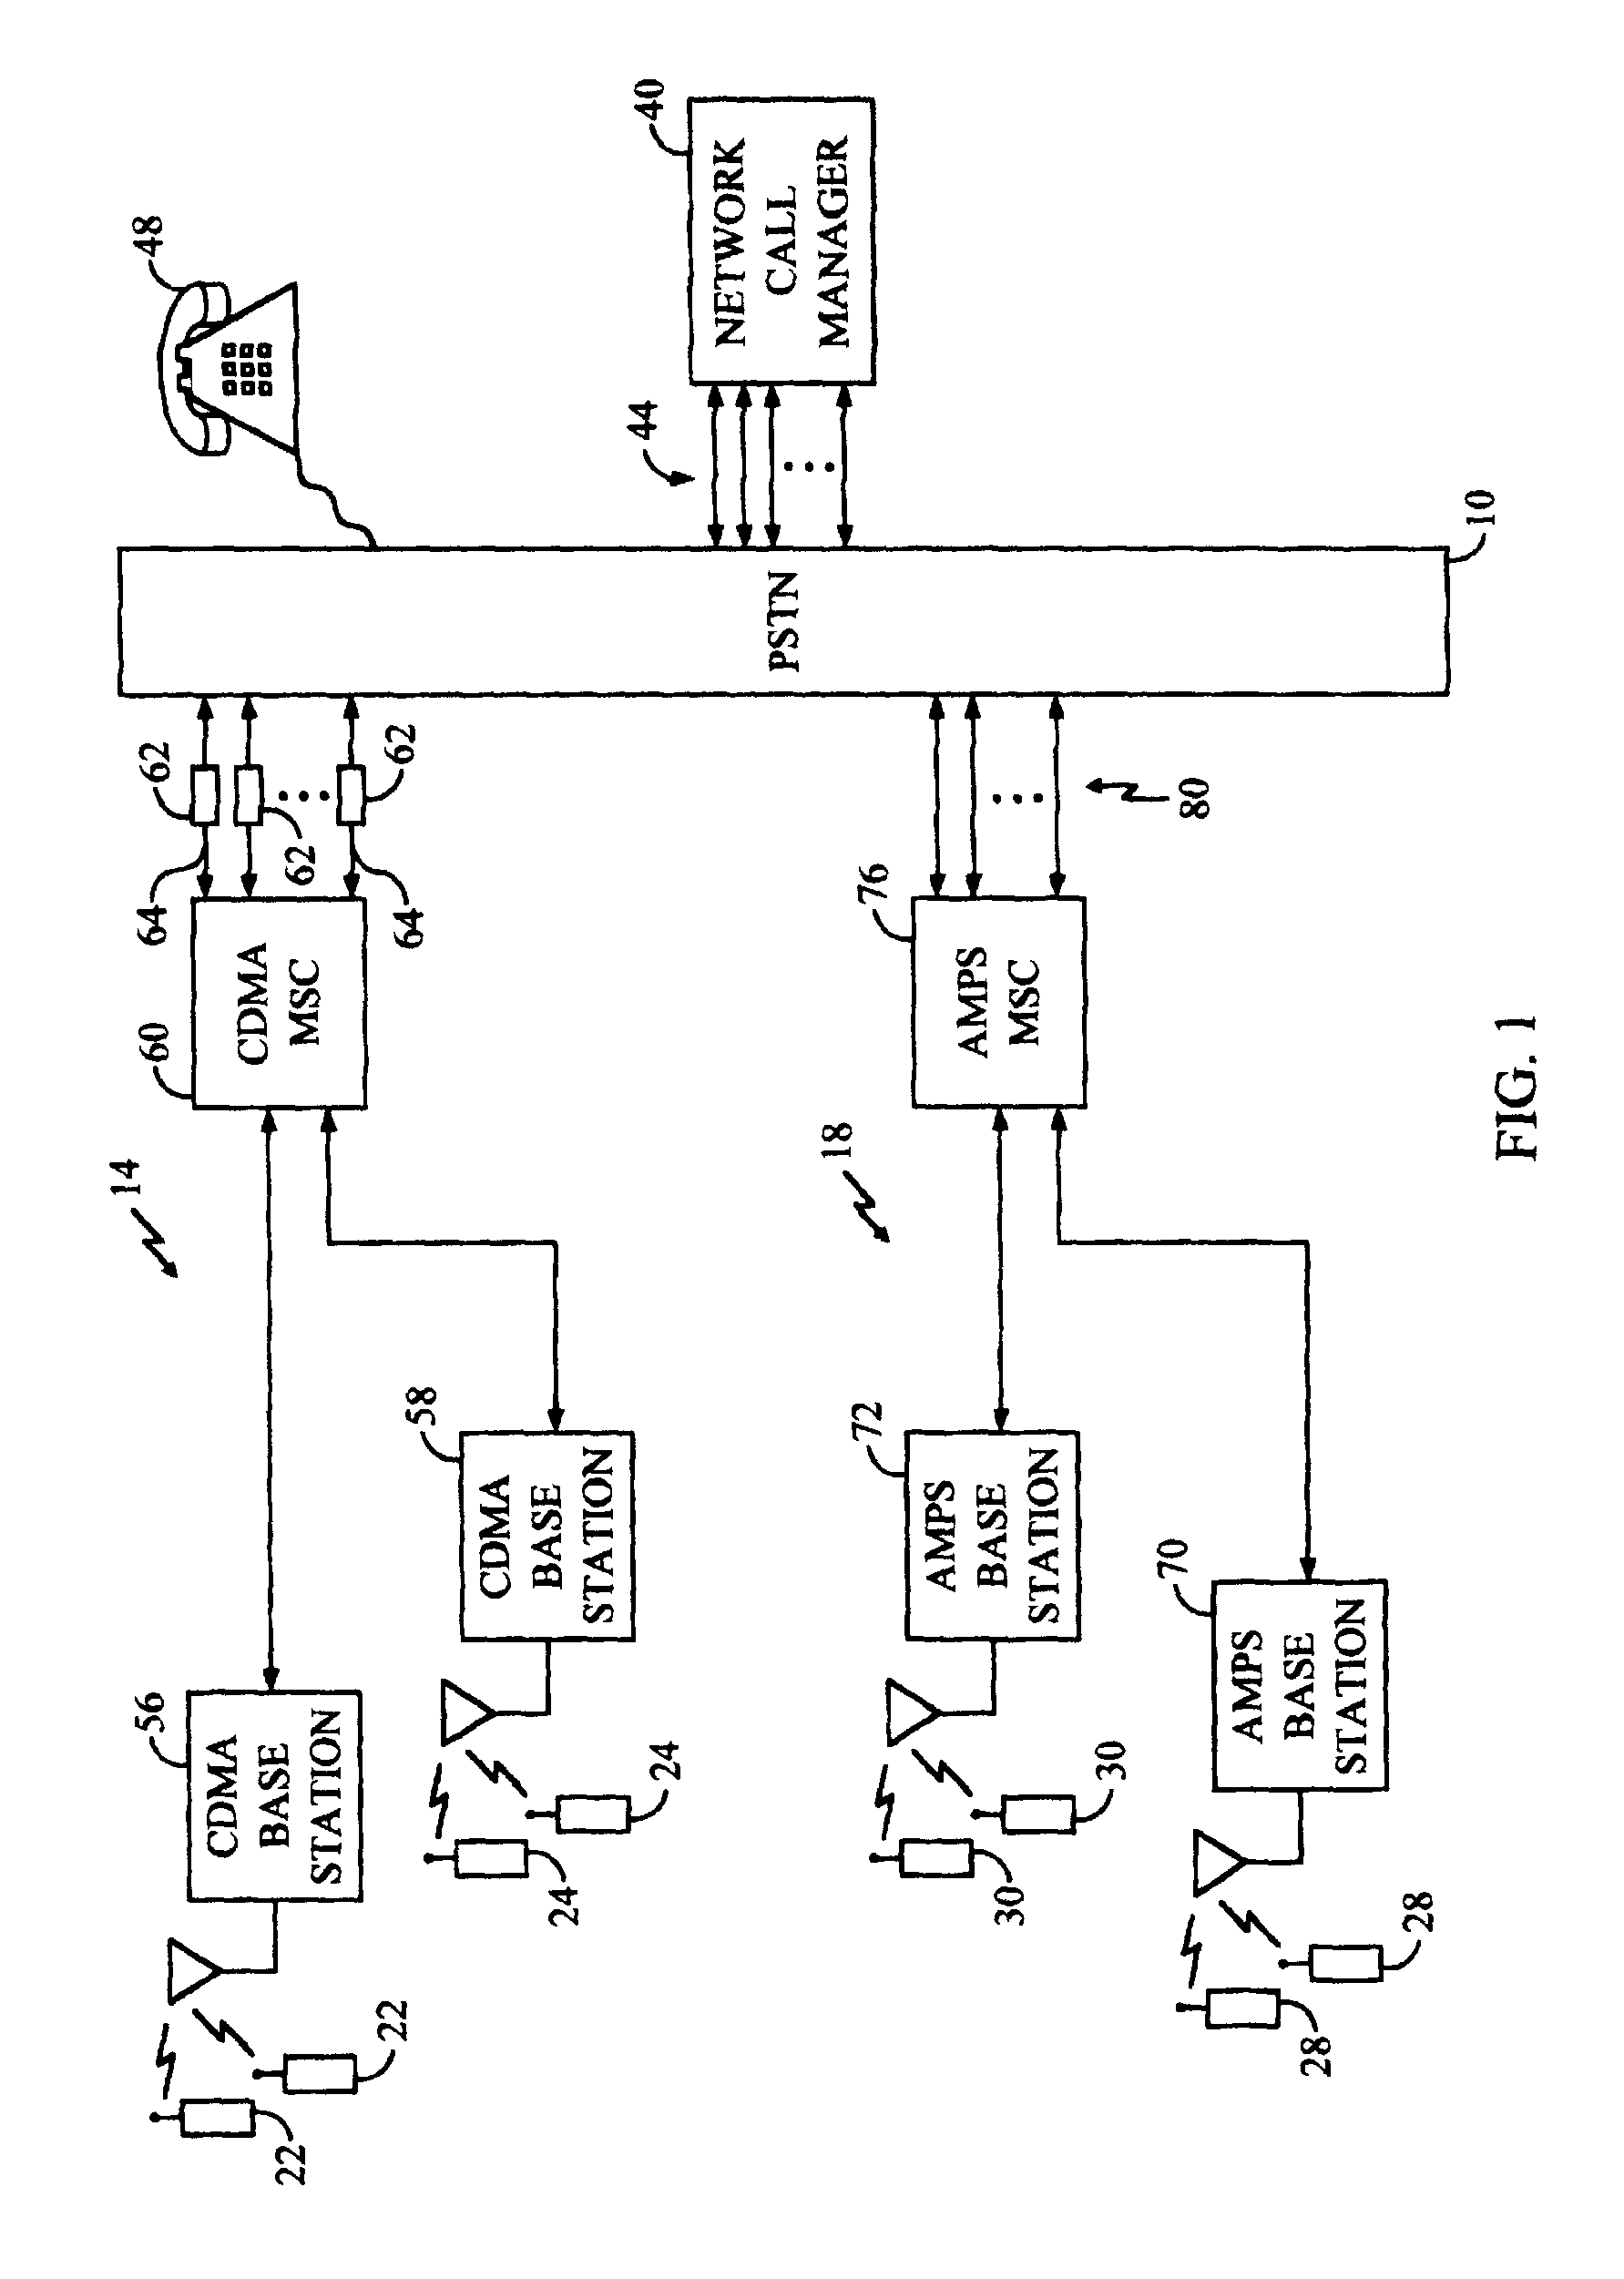 Method and apparatus for providing a private communication system in a public switched telephone network